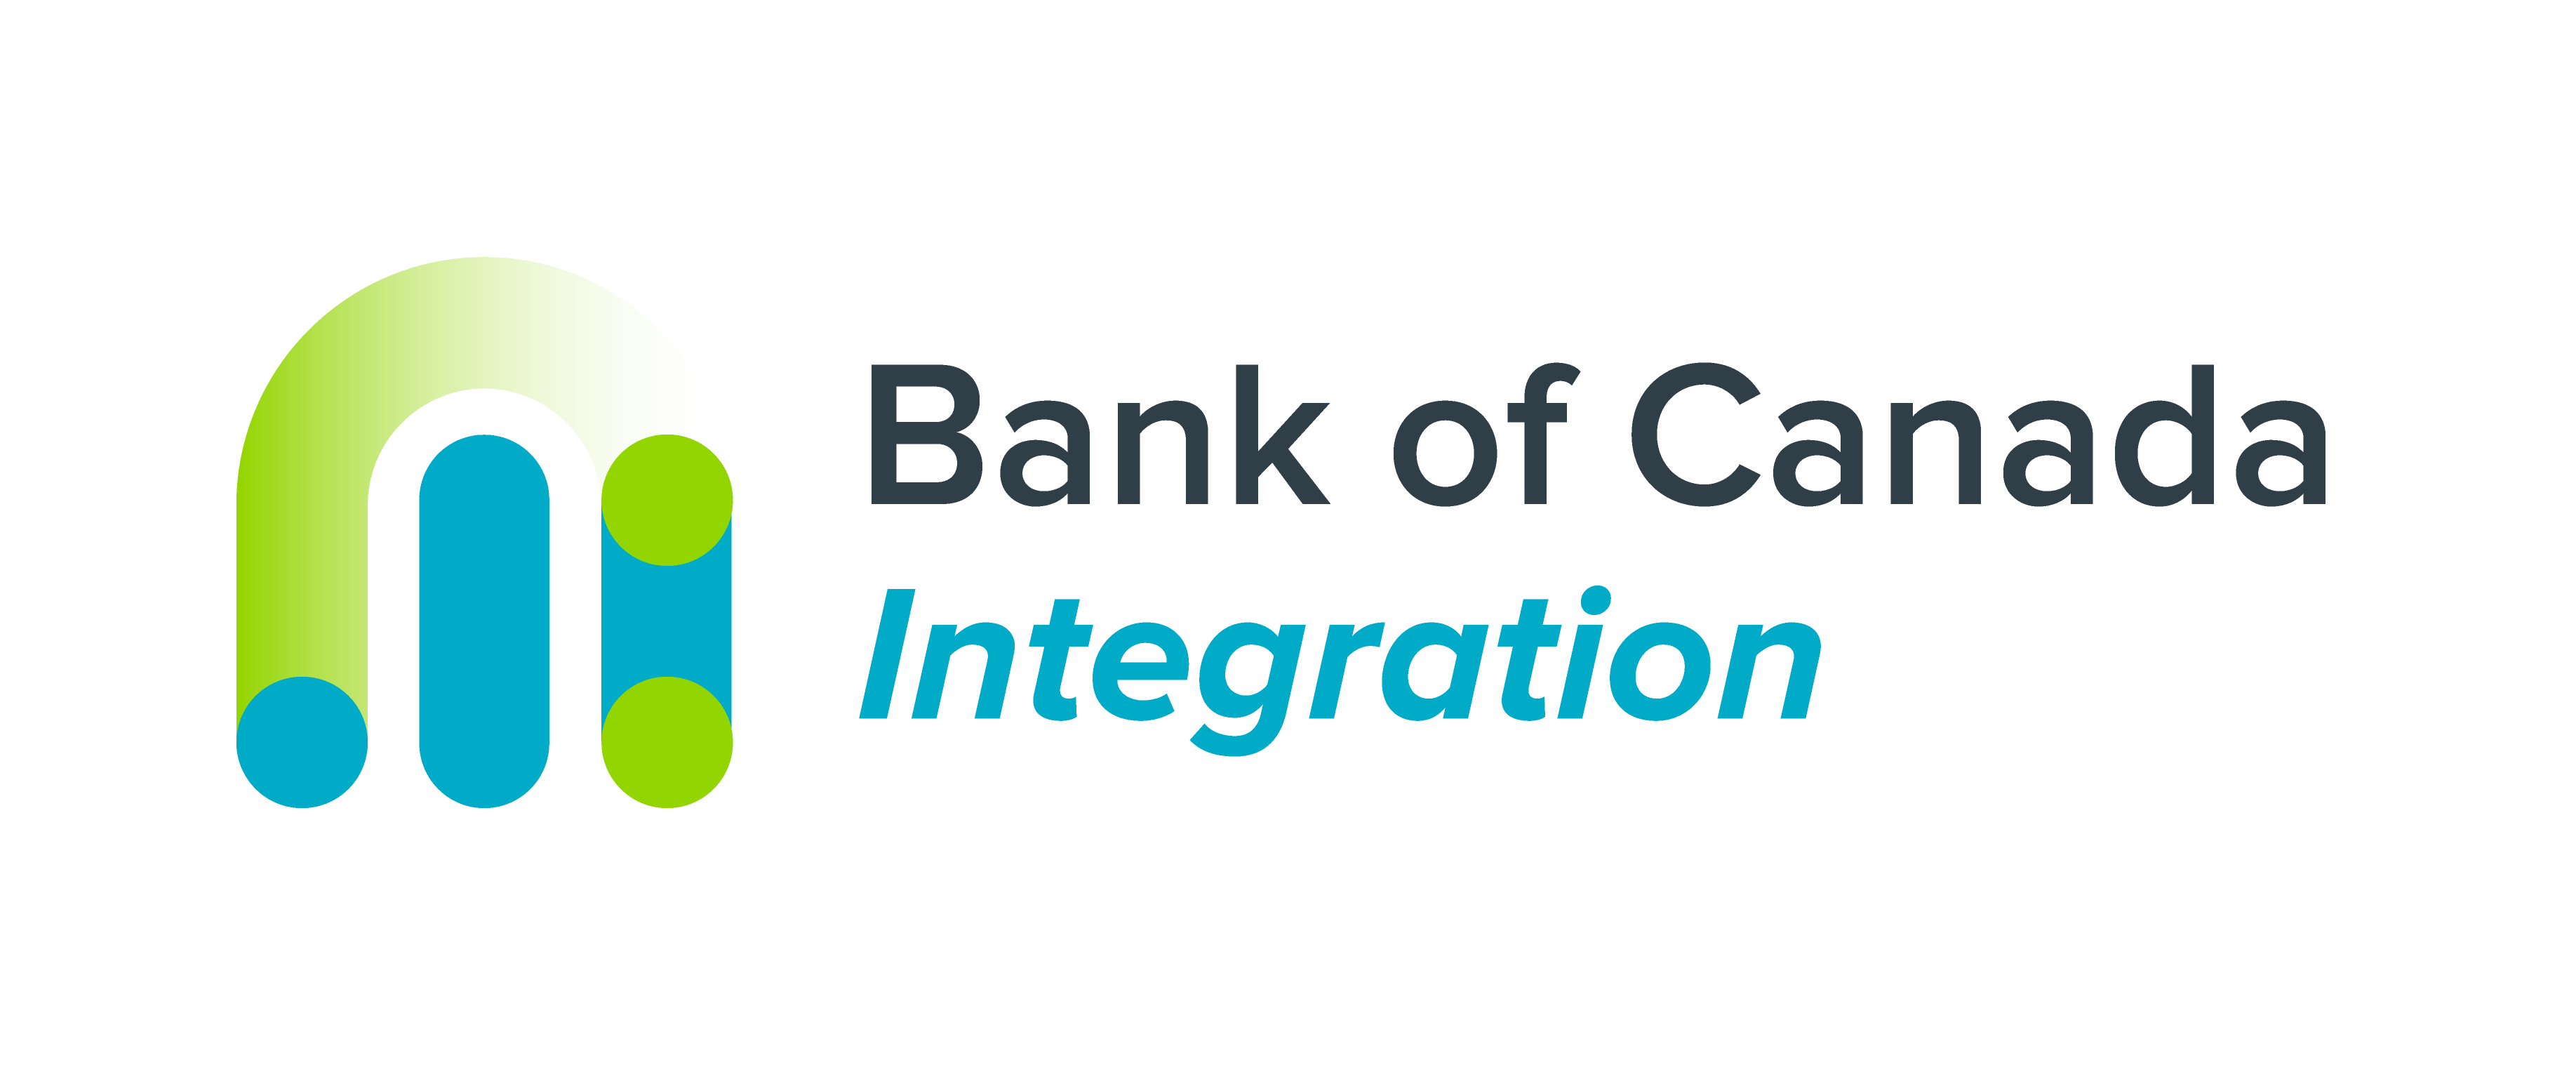 bank of canada integration by efoqus